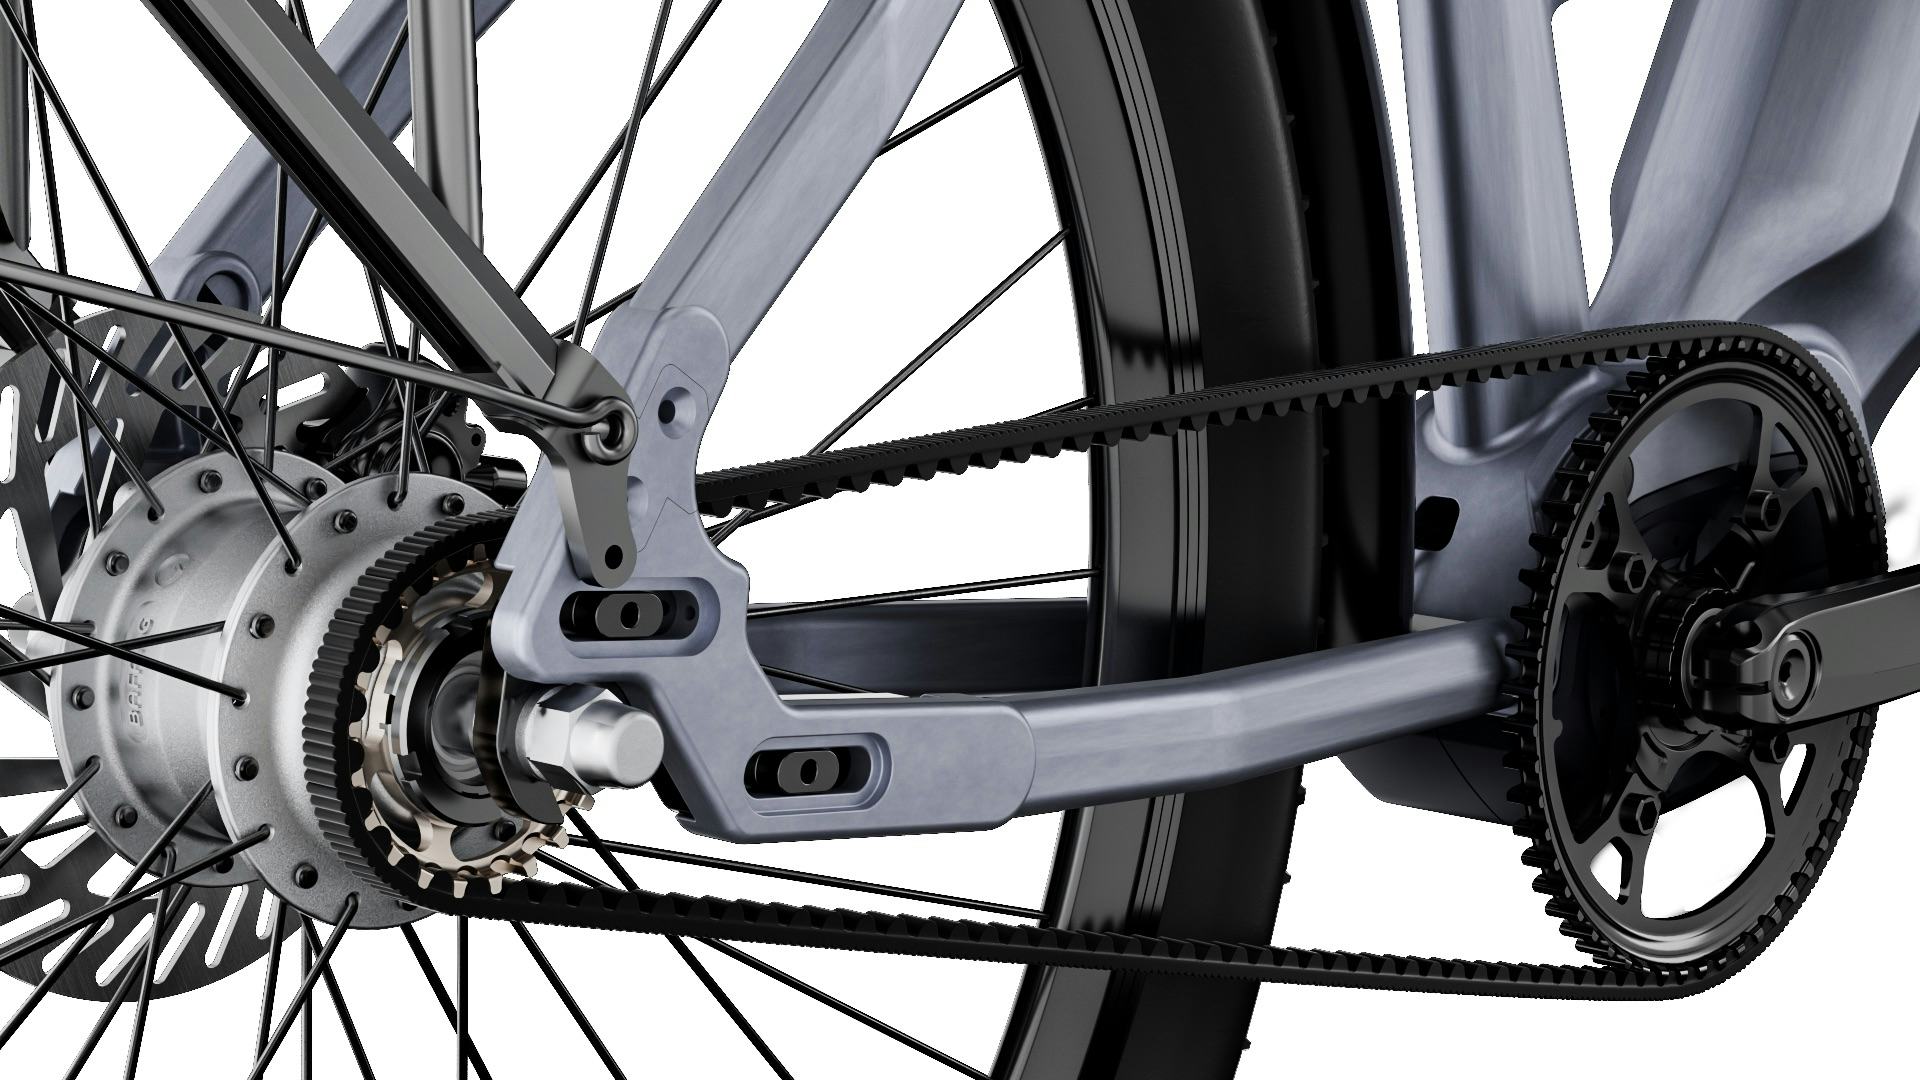 Bafang unveils game-changing GVT technology for e-bikes